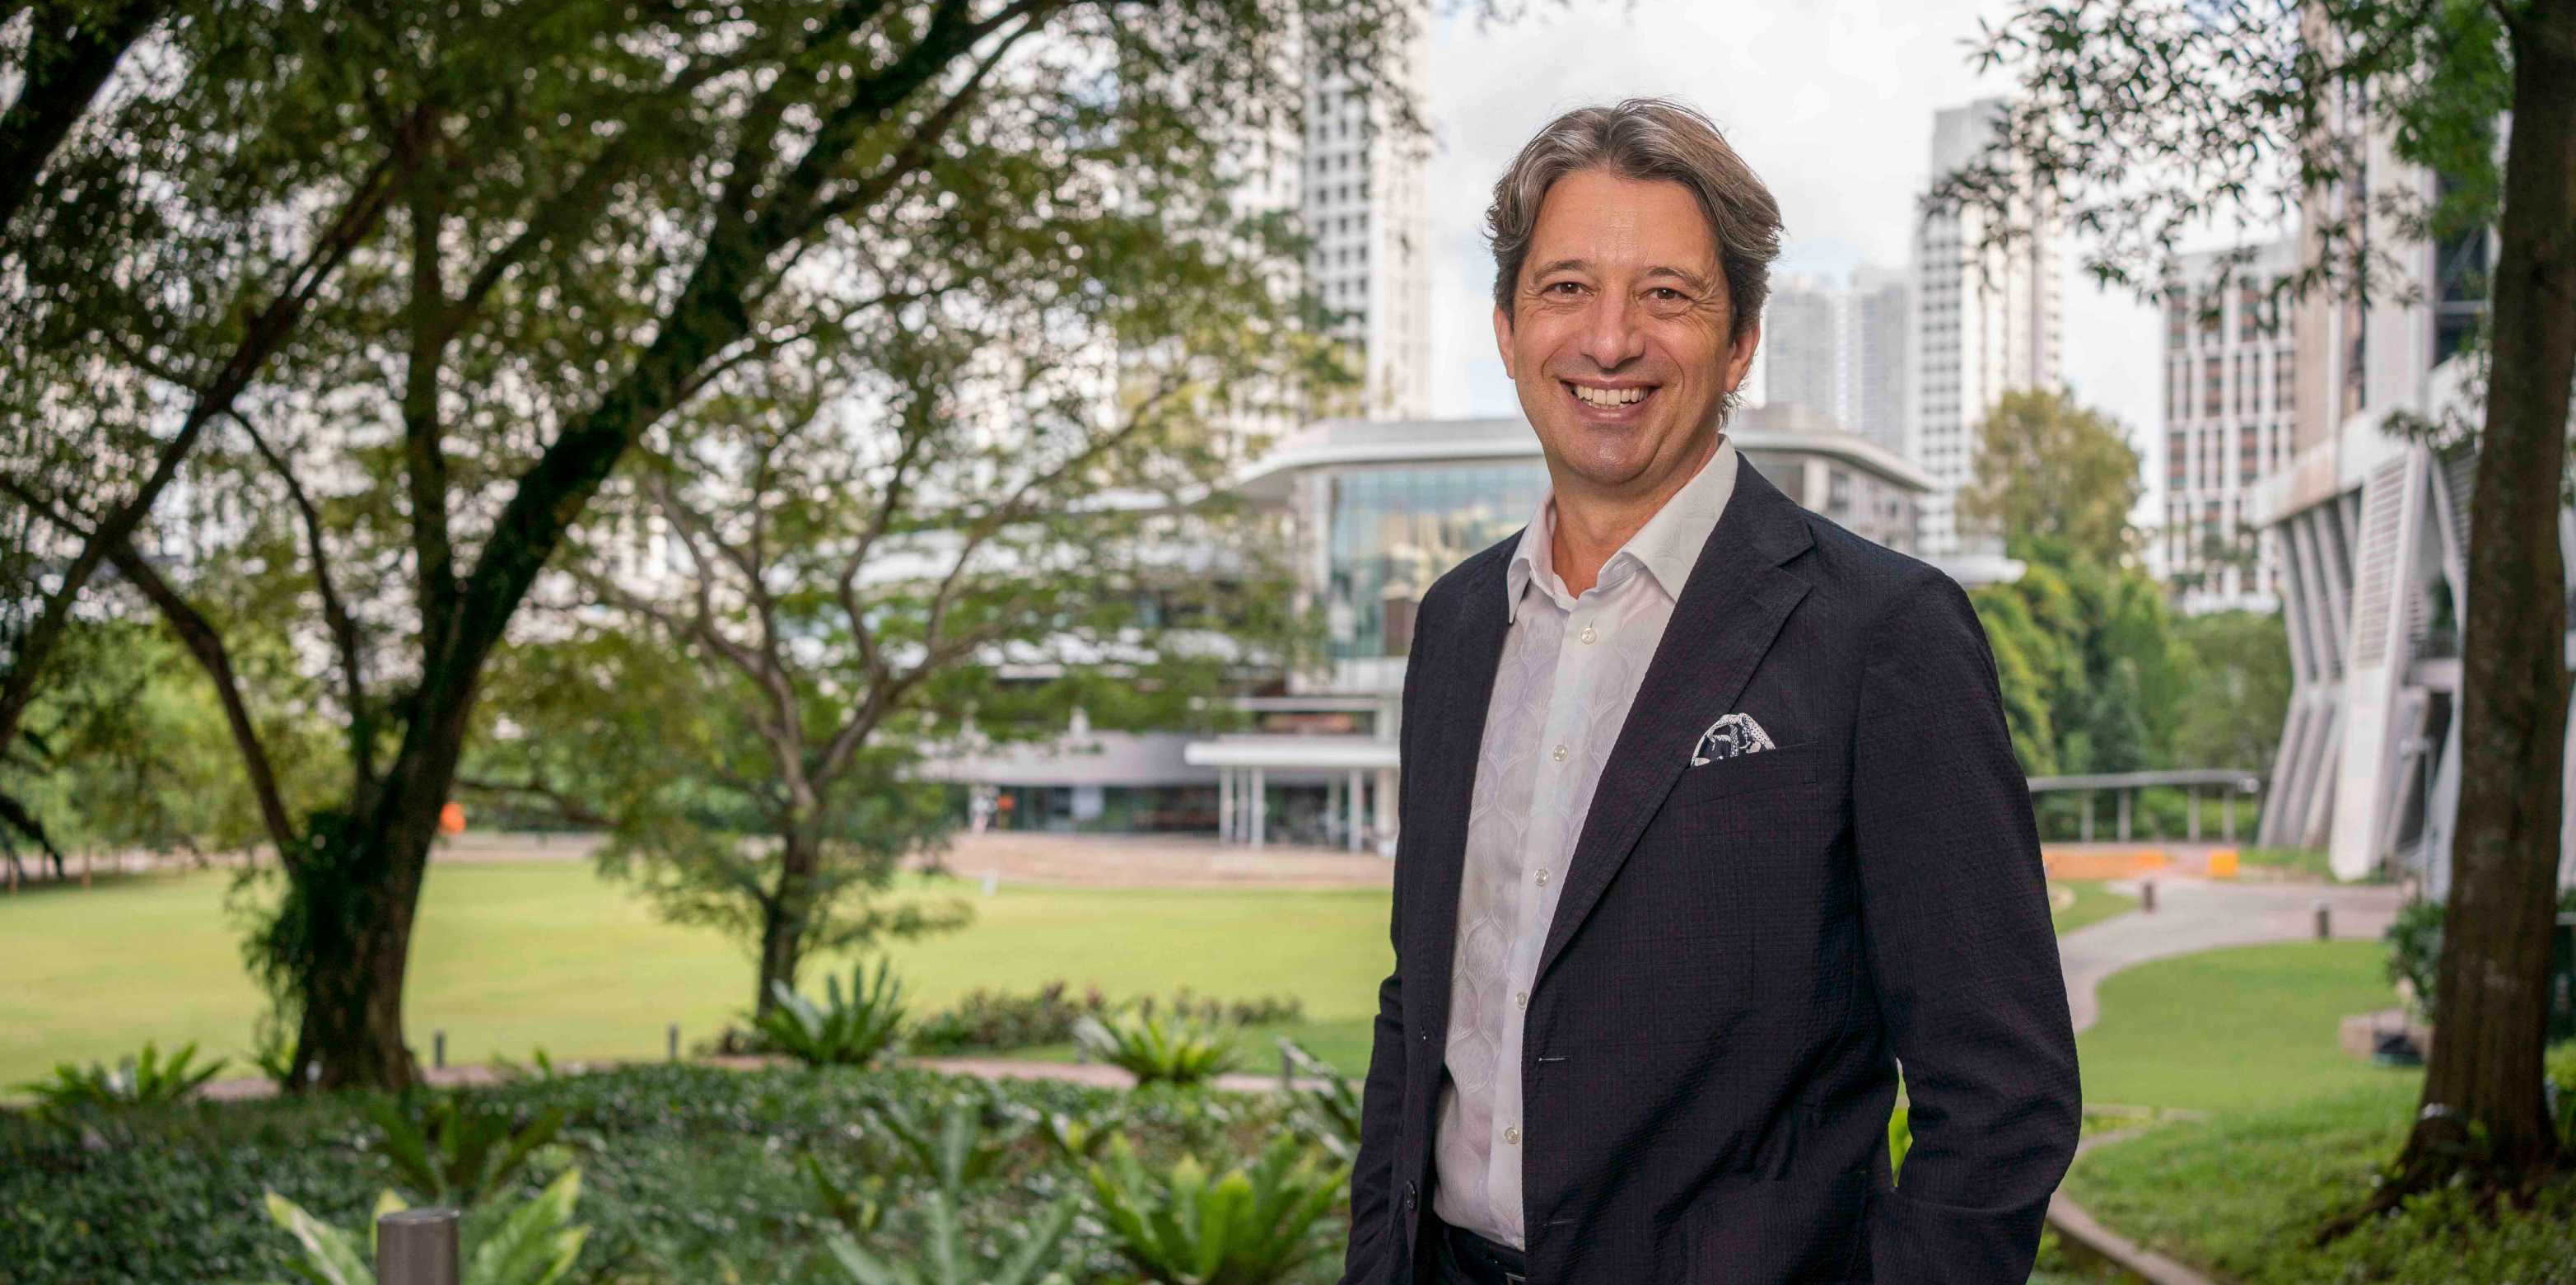 Gisbert Schneider in front of the campus in Singapore